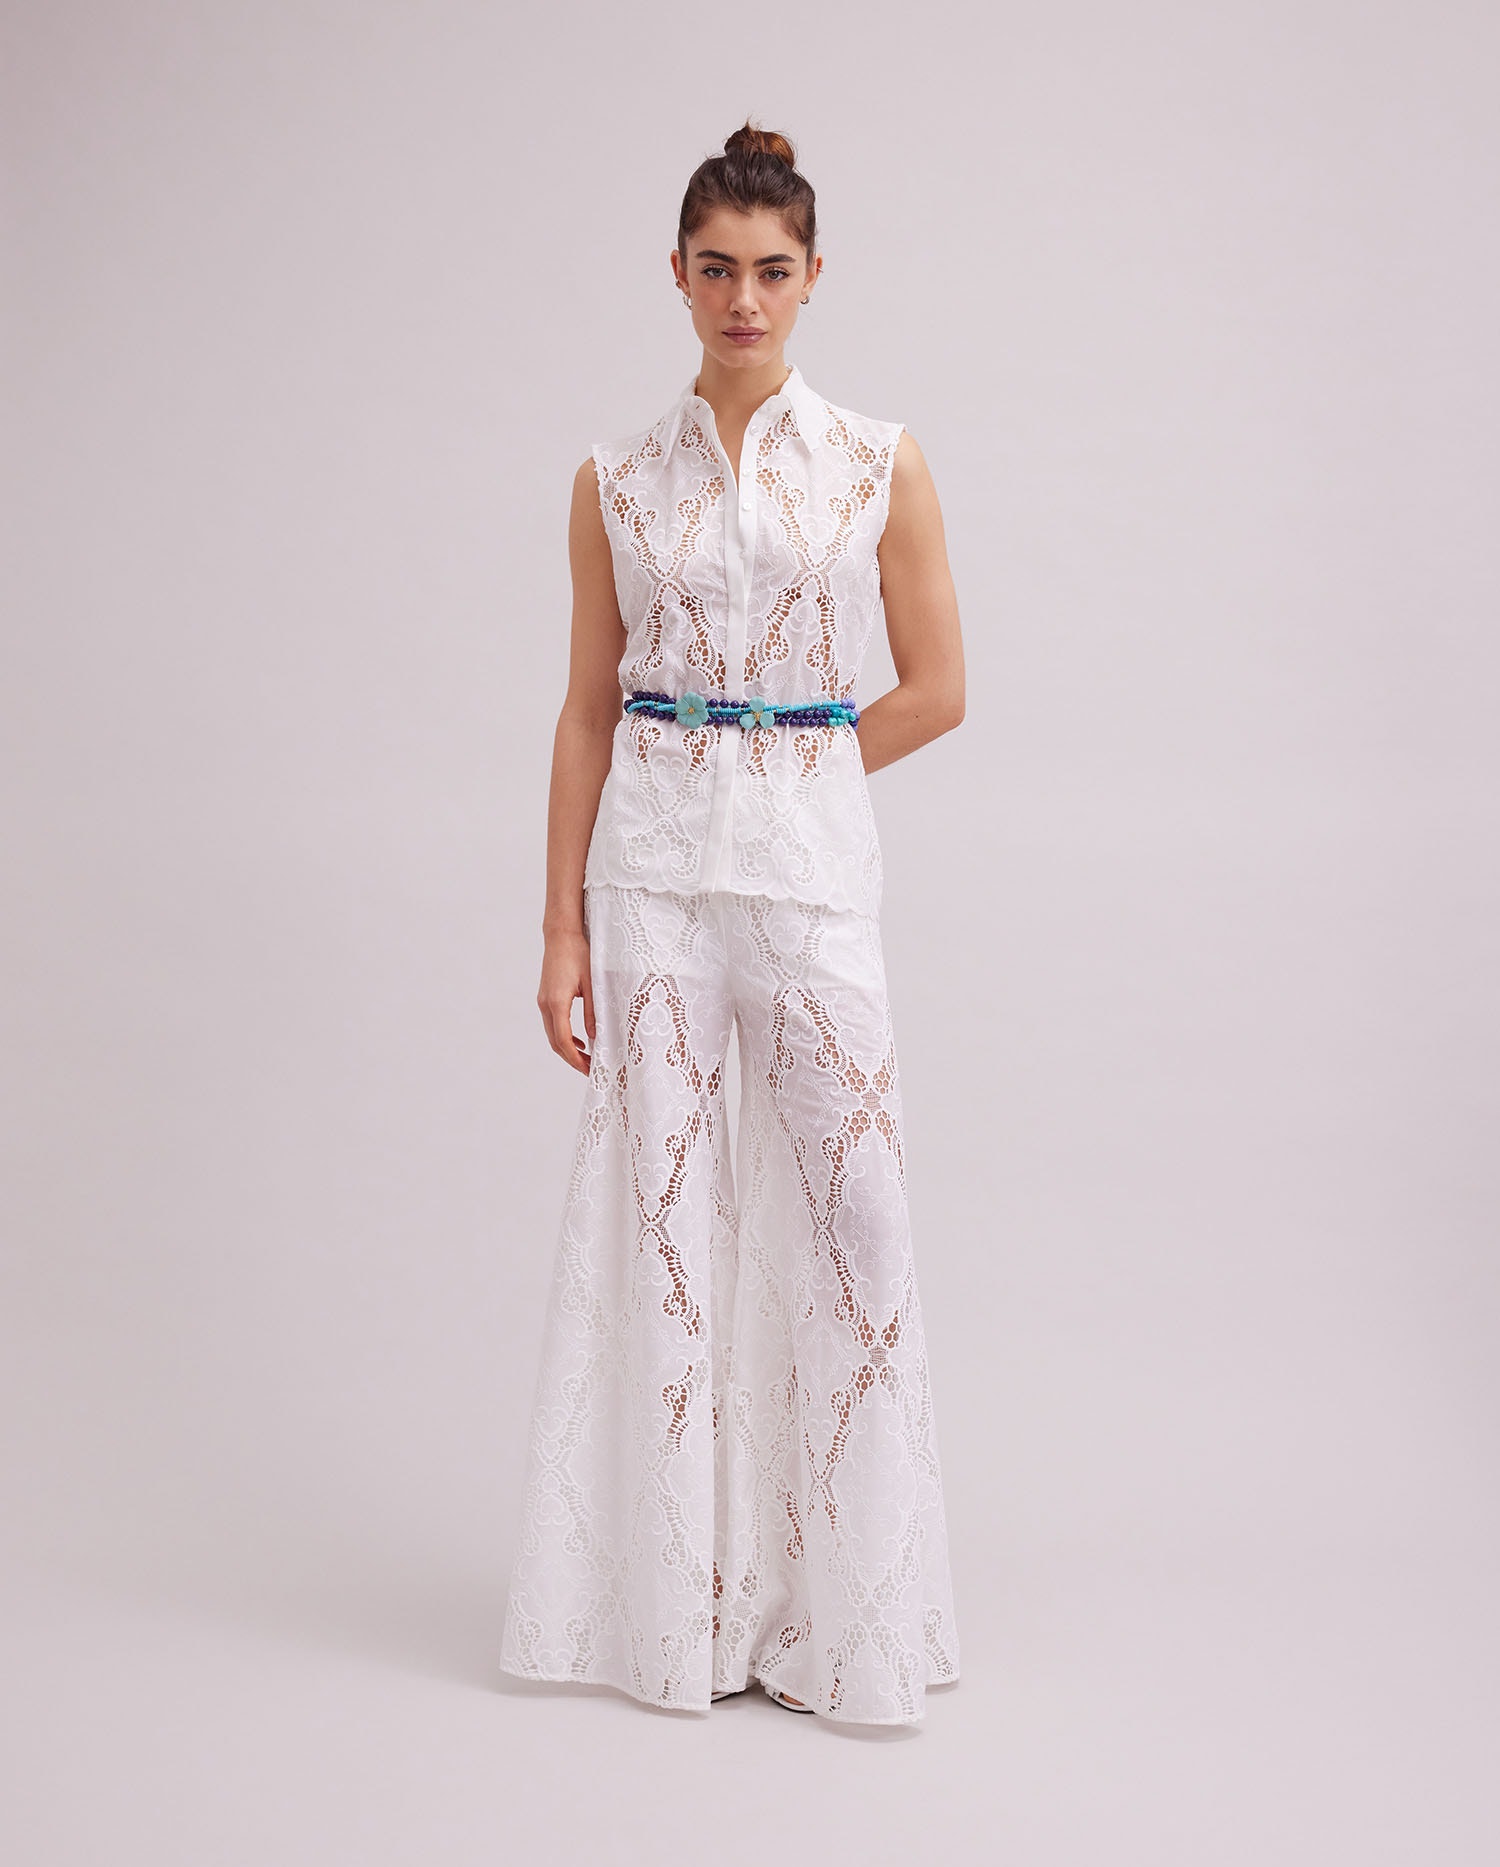 Discover the BAIE white sleeveless eyelet shirt from ANNE FONTAINE